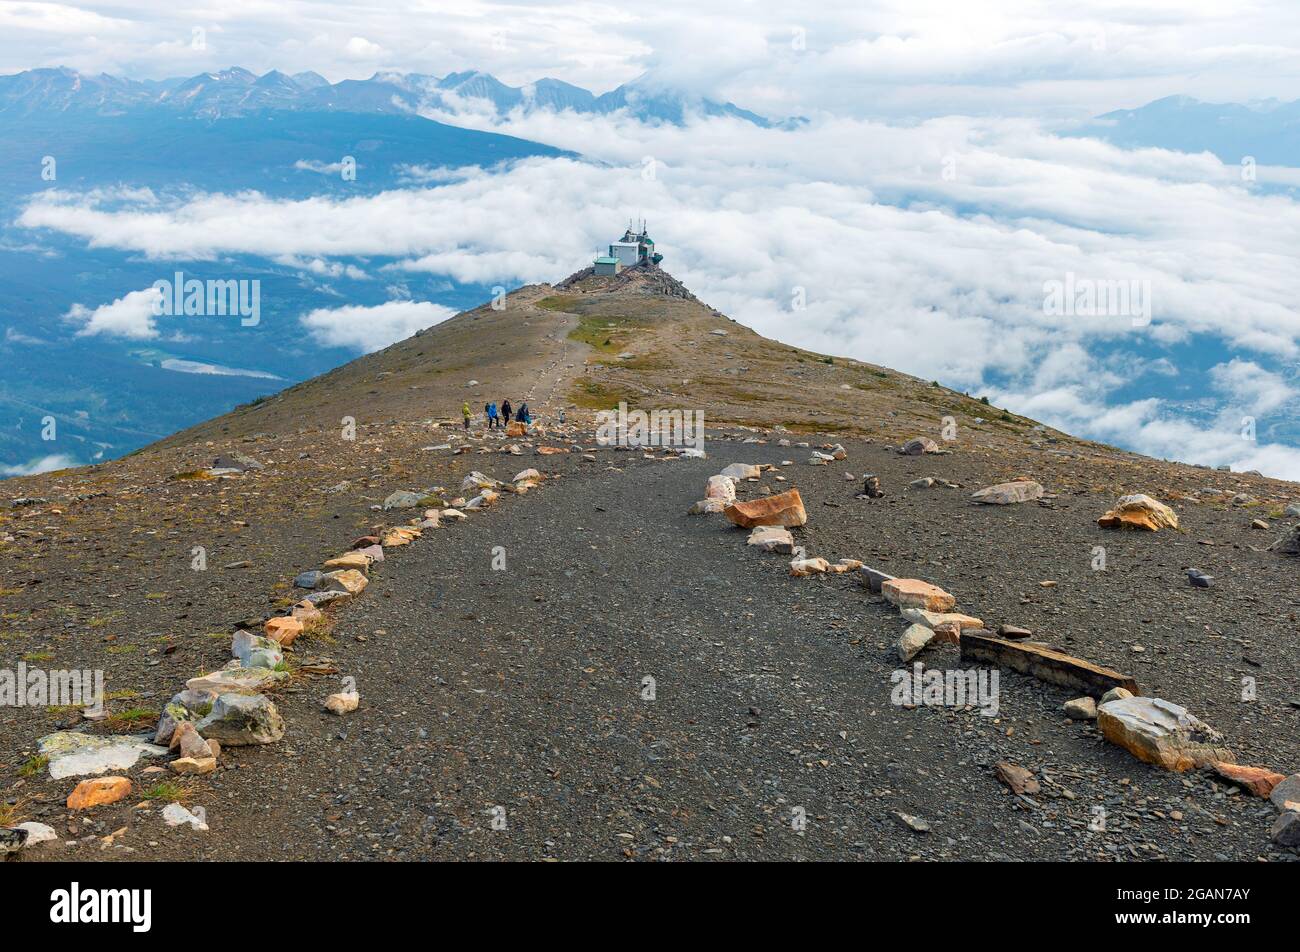 People tourists doing the Whistlers mountain hike, British Columbia, Canada. Stock Photo